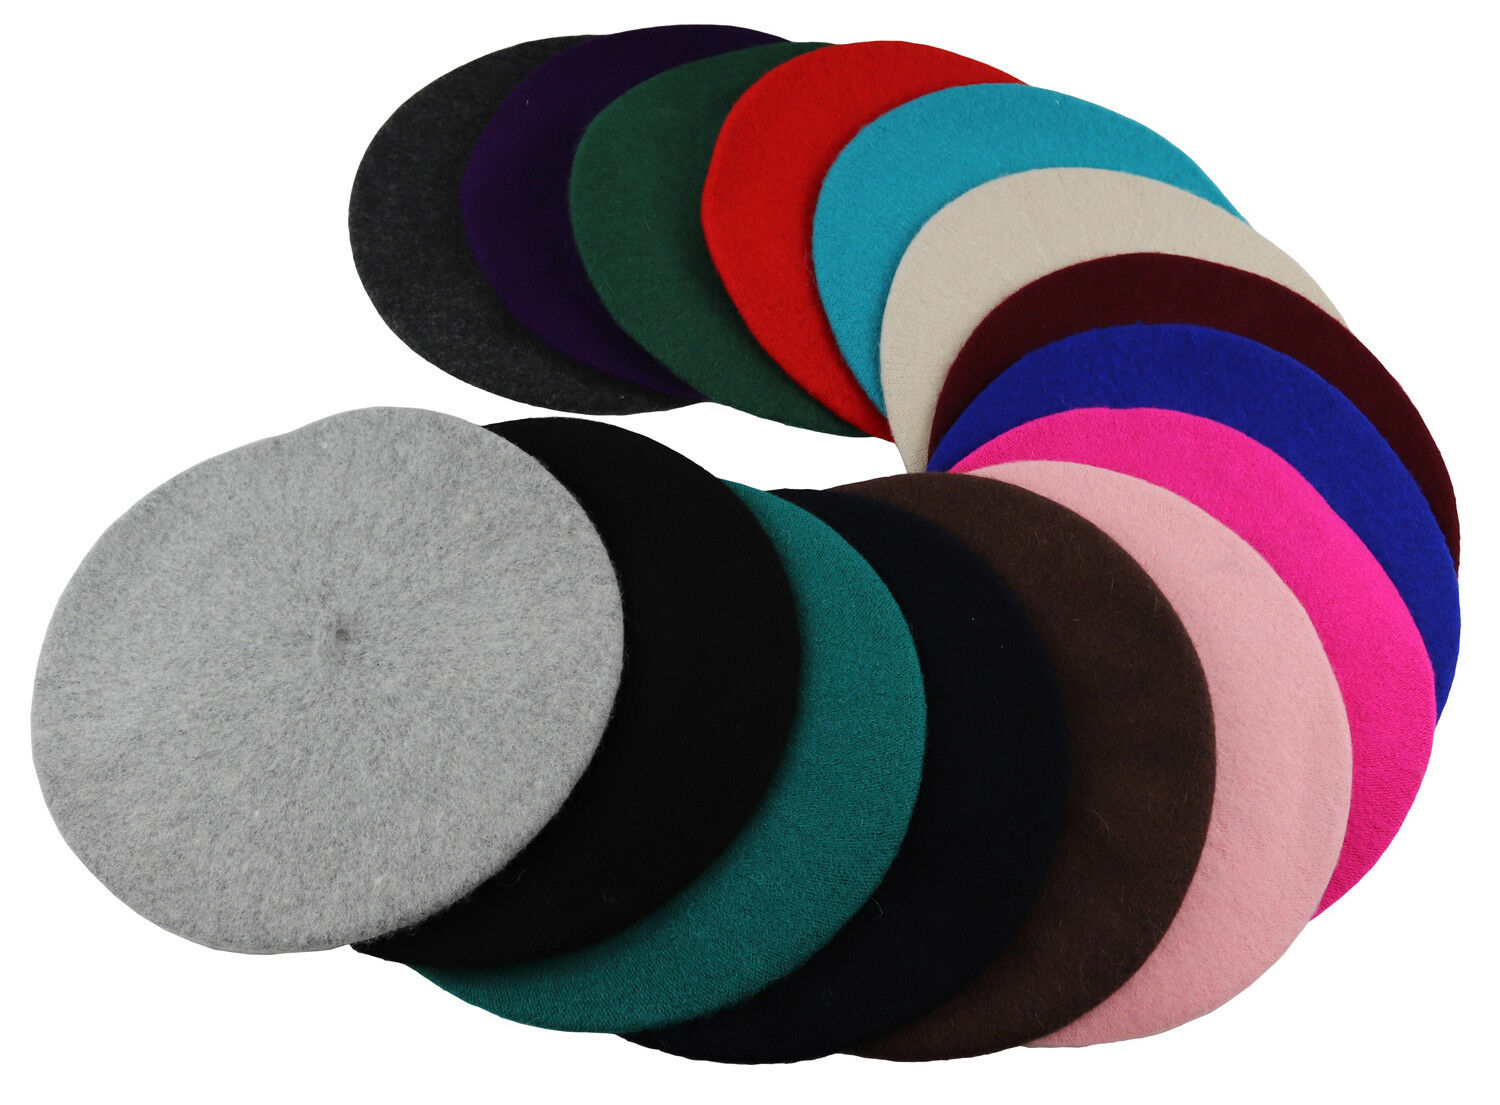 Unisex French Style 100% Wool Beret Hats